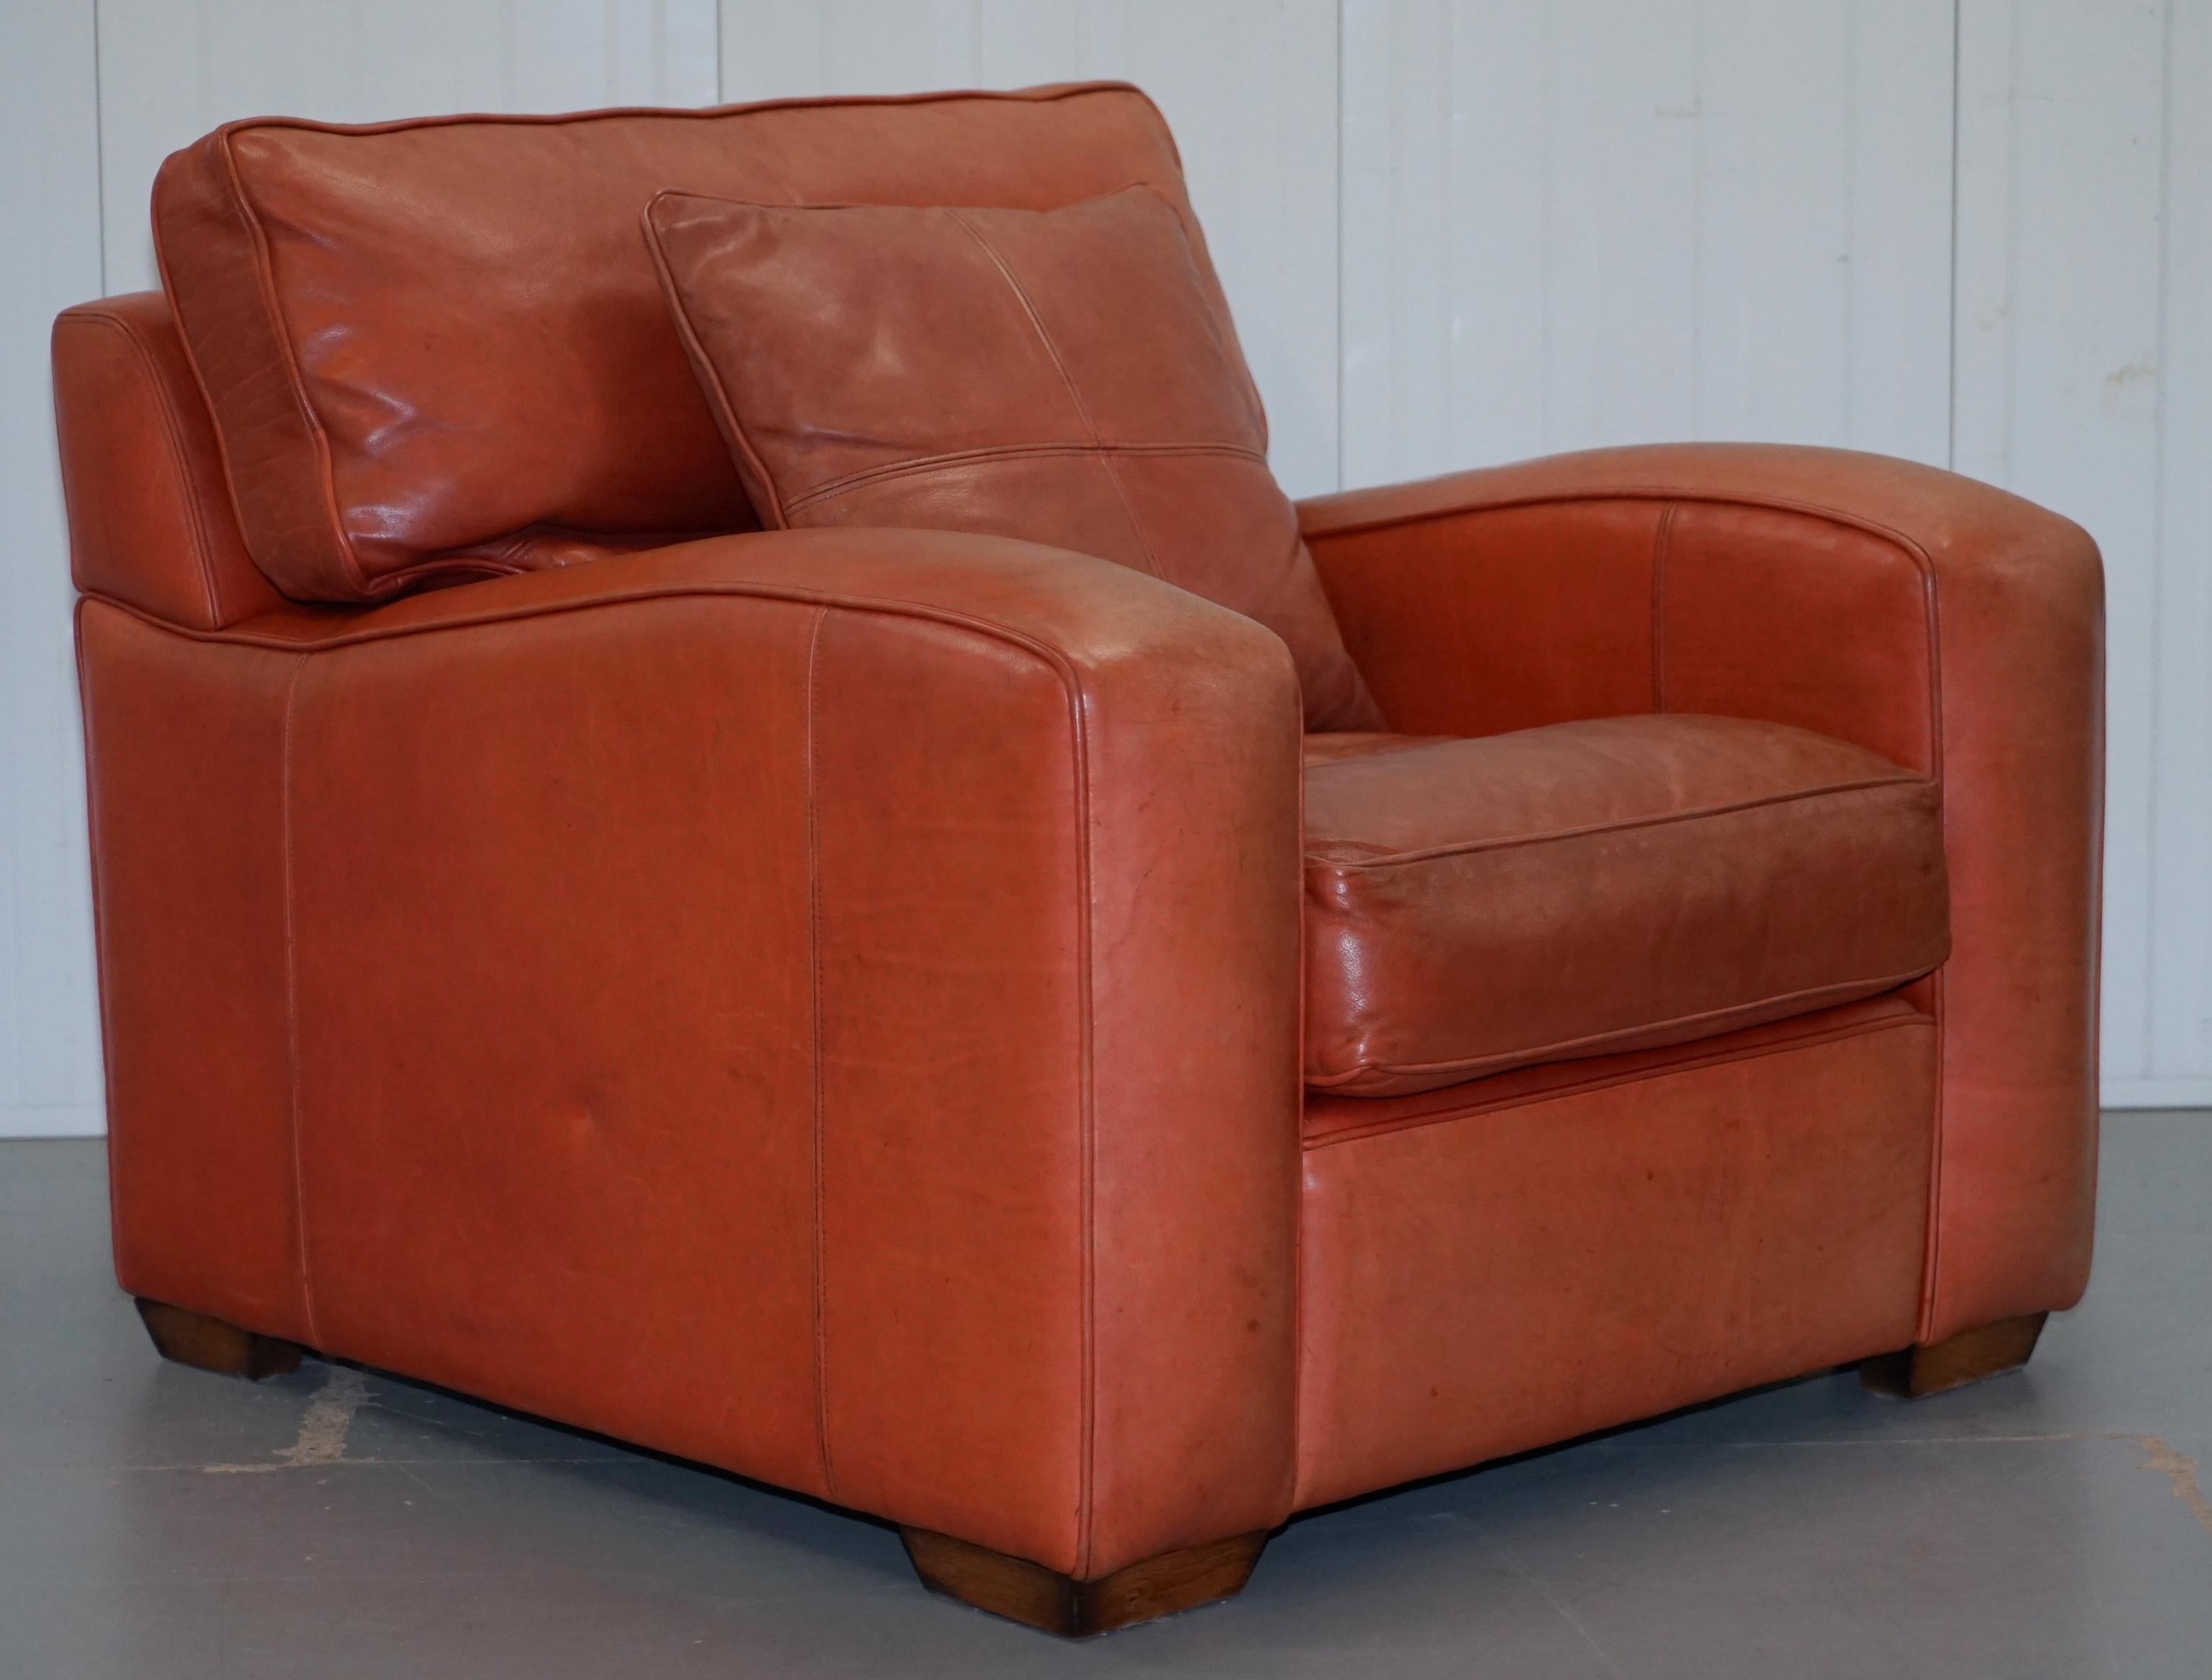 We are delighted to offer for sale this original Duresta Panther brown leather armchair with plantation oversized footstool RRP £4800

The Panther collection is inspired by the 1920s club seating, the style and charm of this piece doesn’t